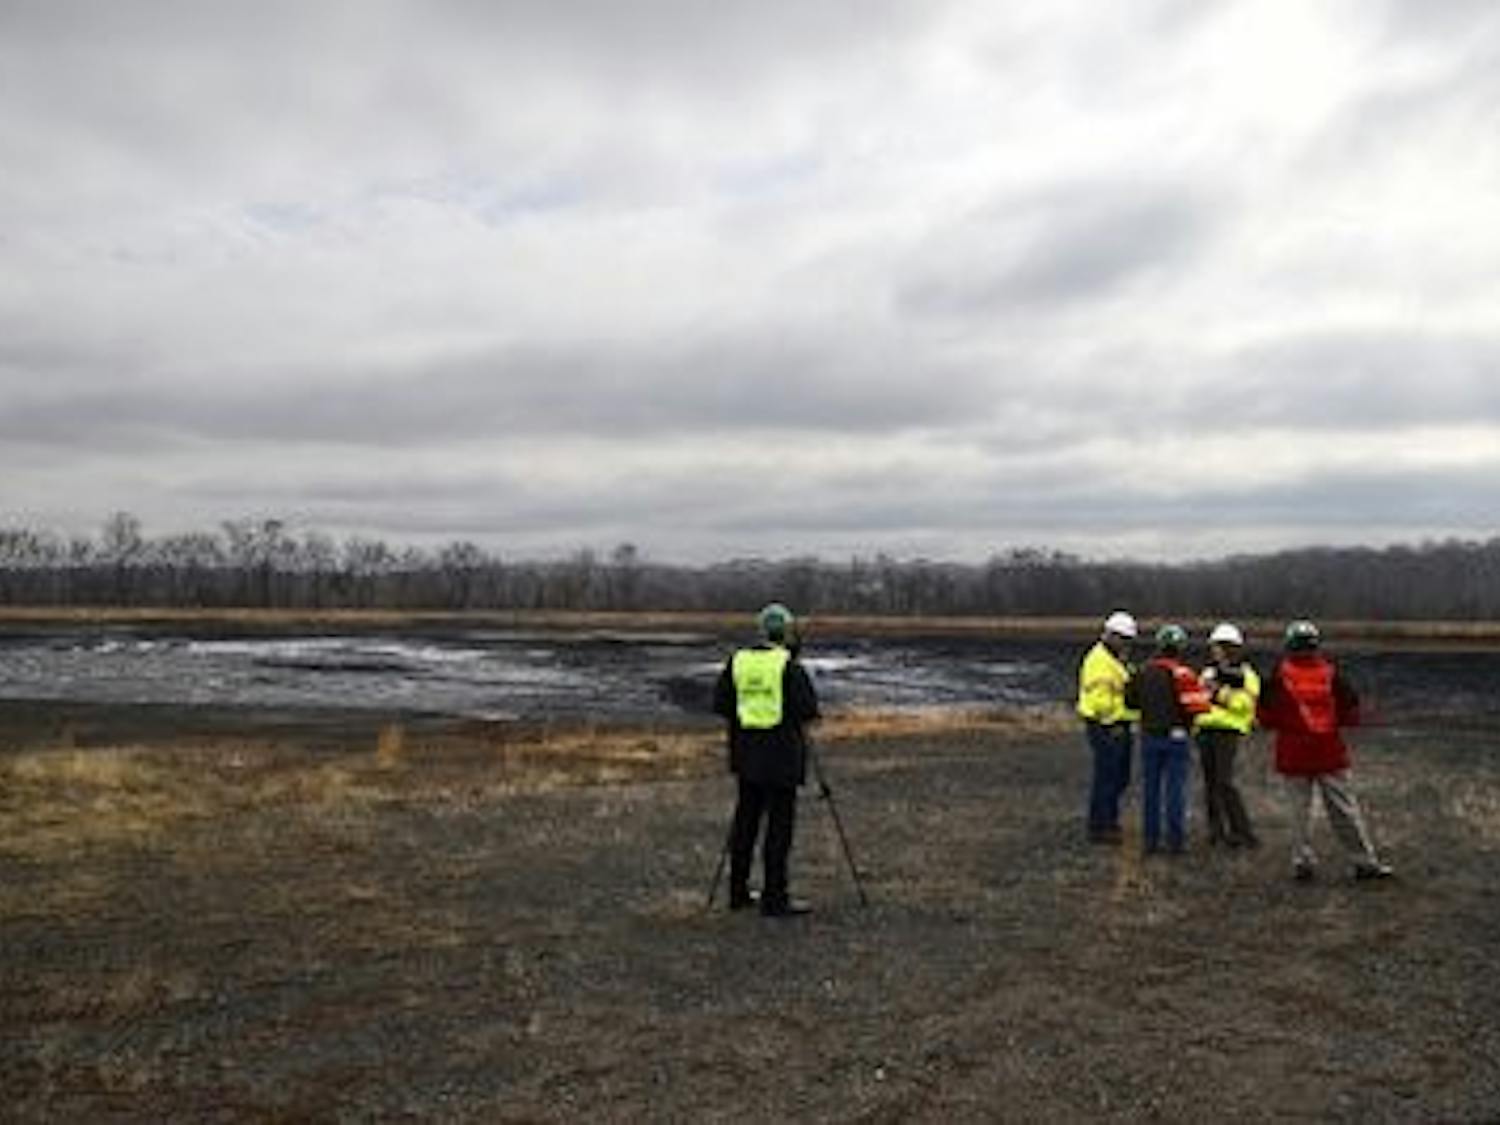 Duke officials took media members on a brief tour of the coal ash pond where an underground storm water pipe developed a break allowing water containing coal ash leaked into the Dan River at Eden, NC. (John D. Simmons/Charlotte Observer/MCT)